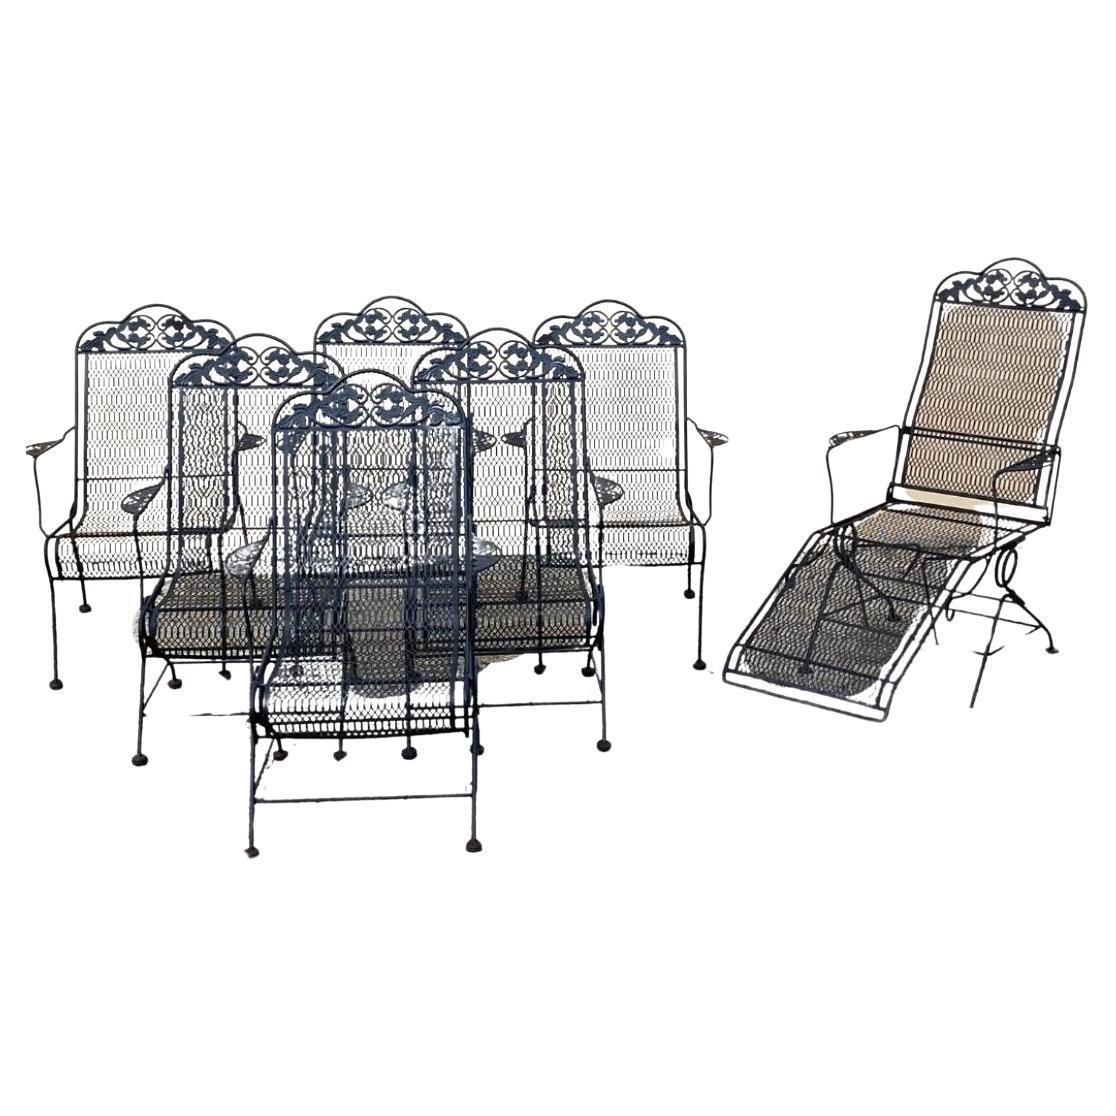 Vintage Wrought Iron Rose and Vine Pattern Garden Patio Chairs - 7 Pc Set For Sale